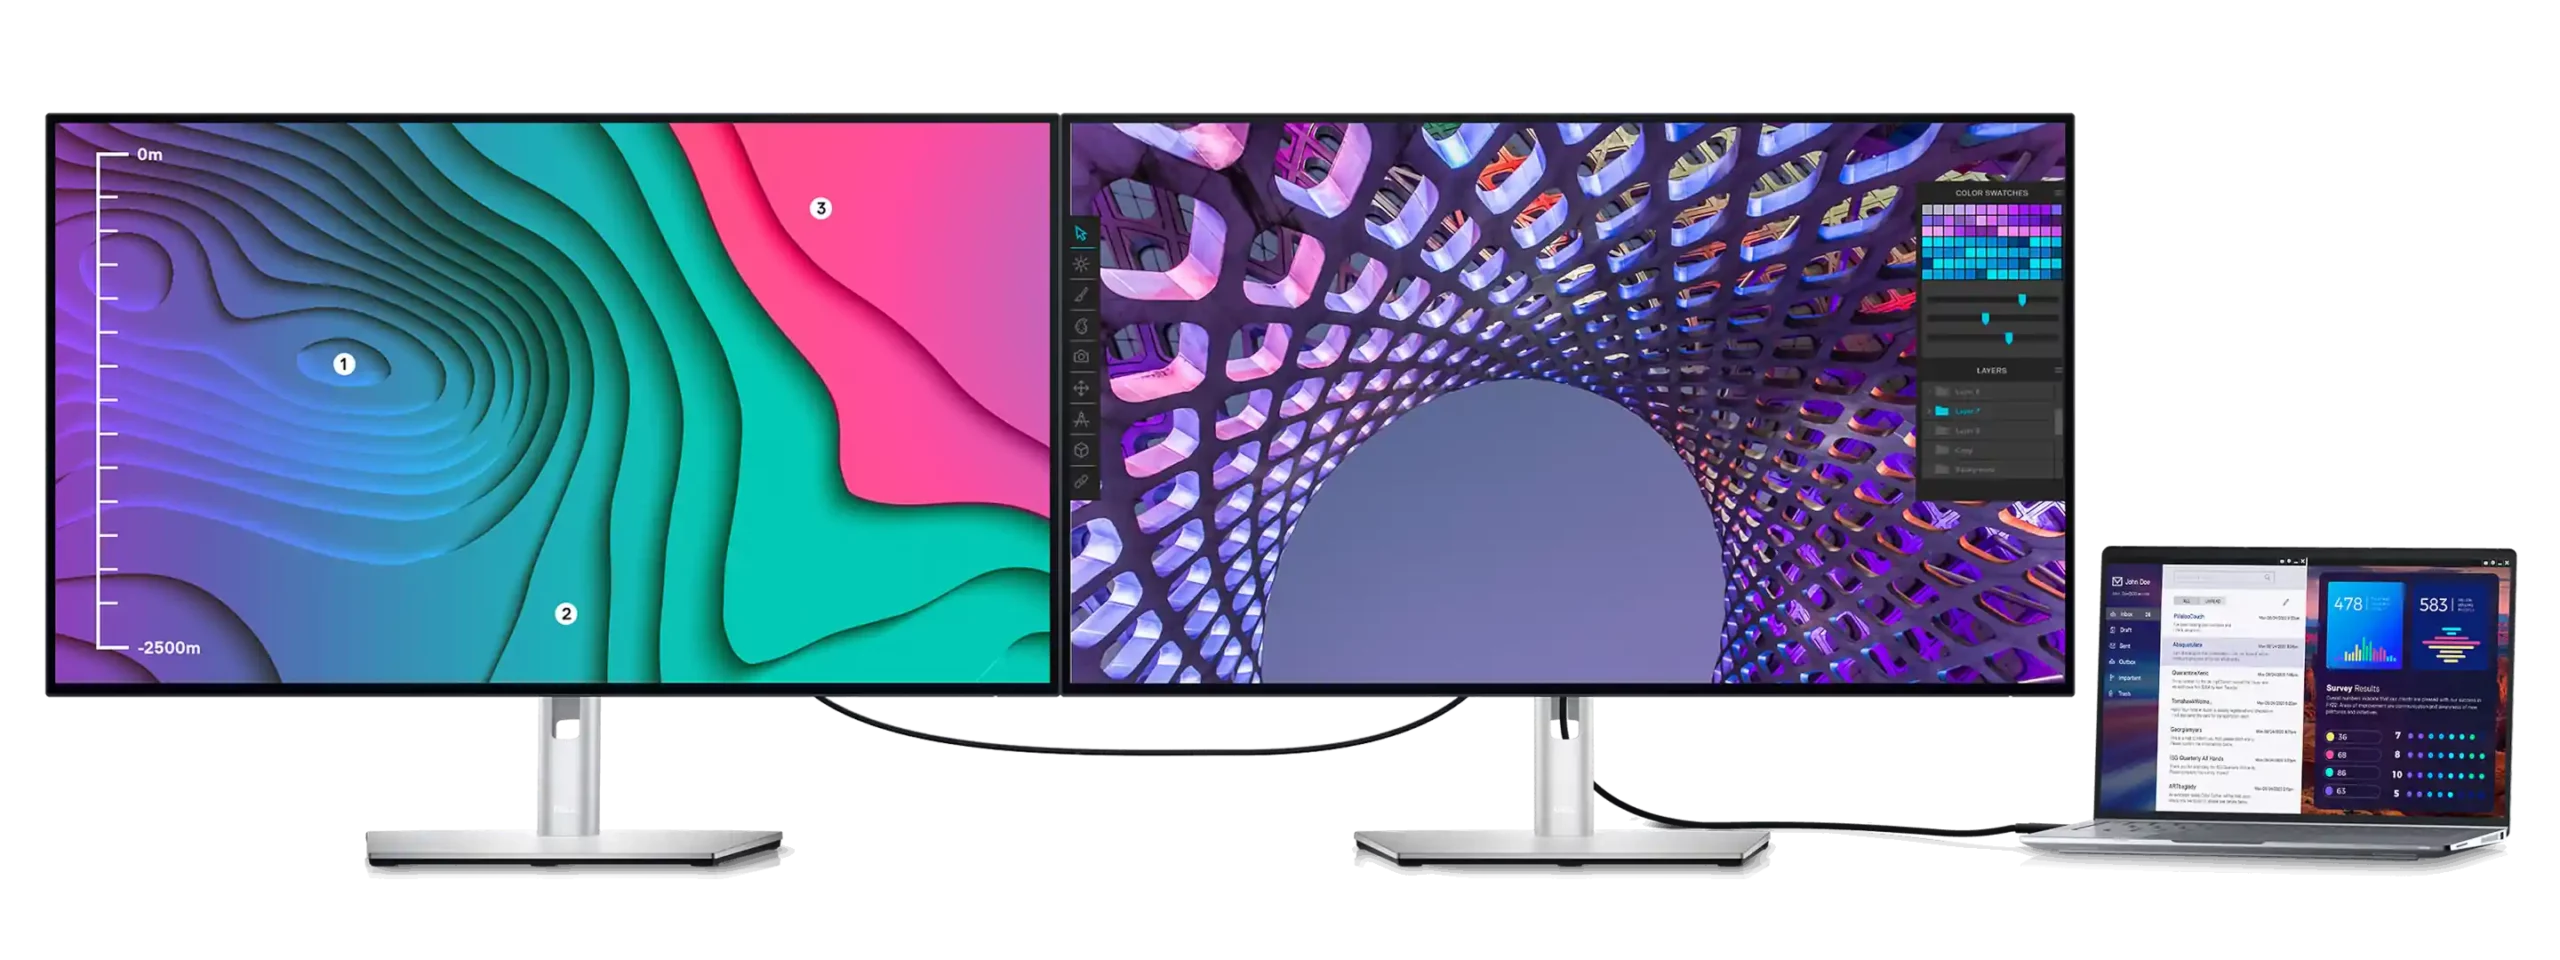 Dell launches two 4K UltraSharp screens with IPS Black tech | Club386